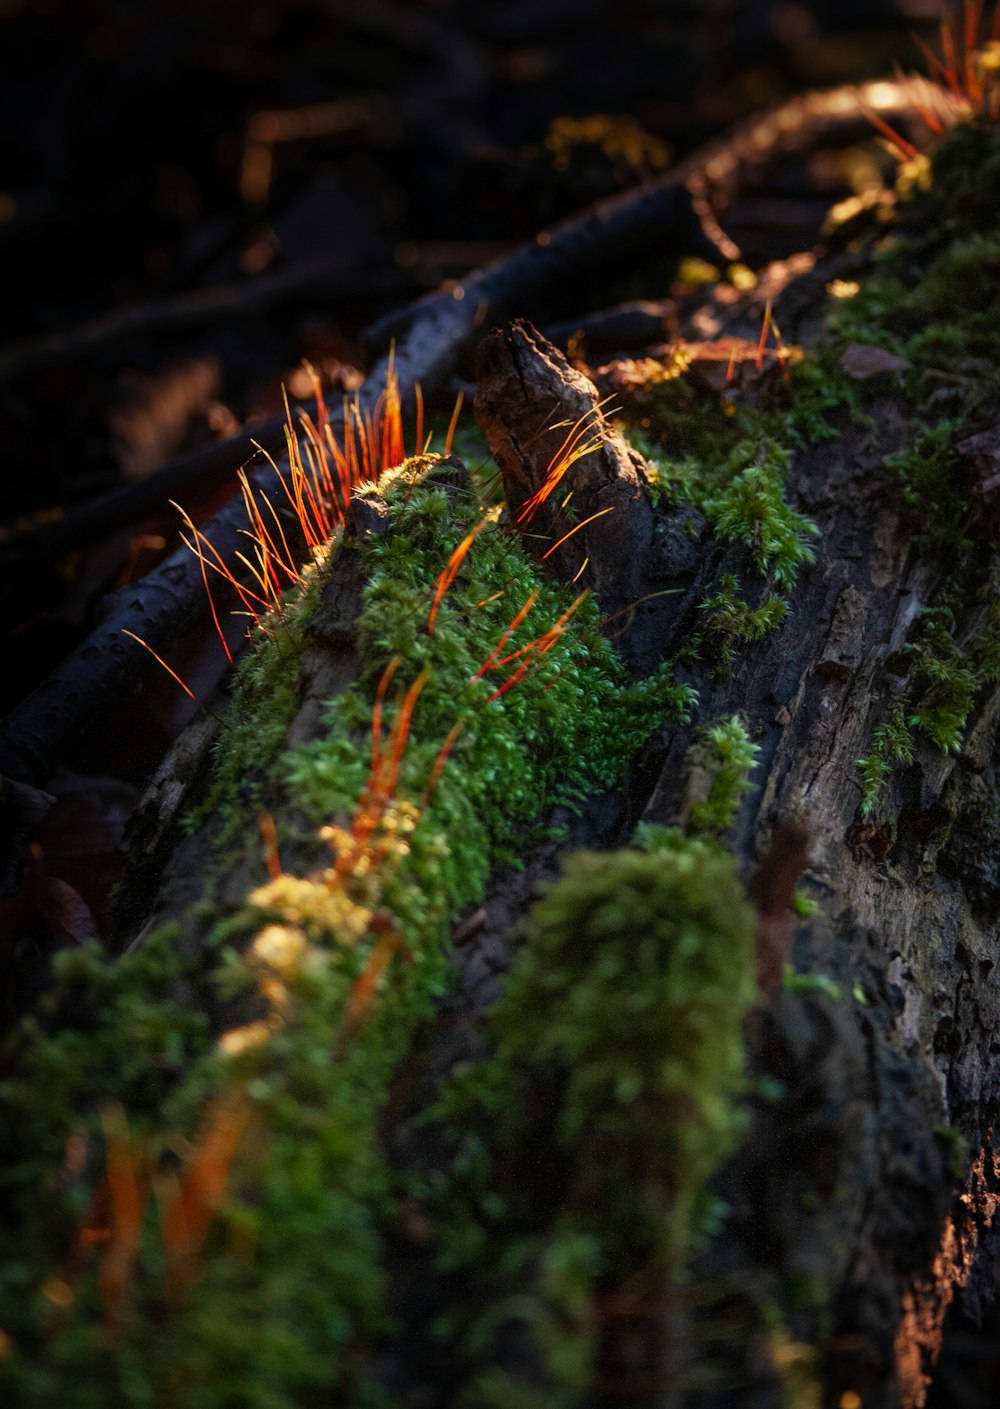 a close up of moss growing on a log